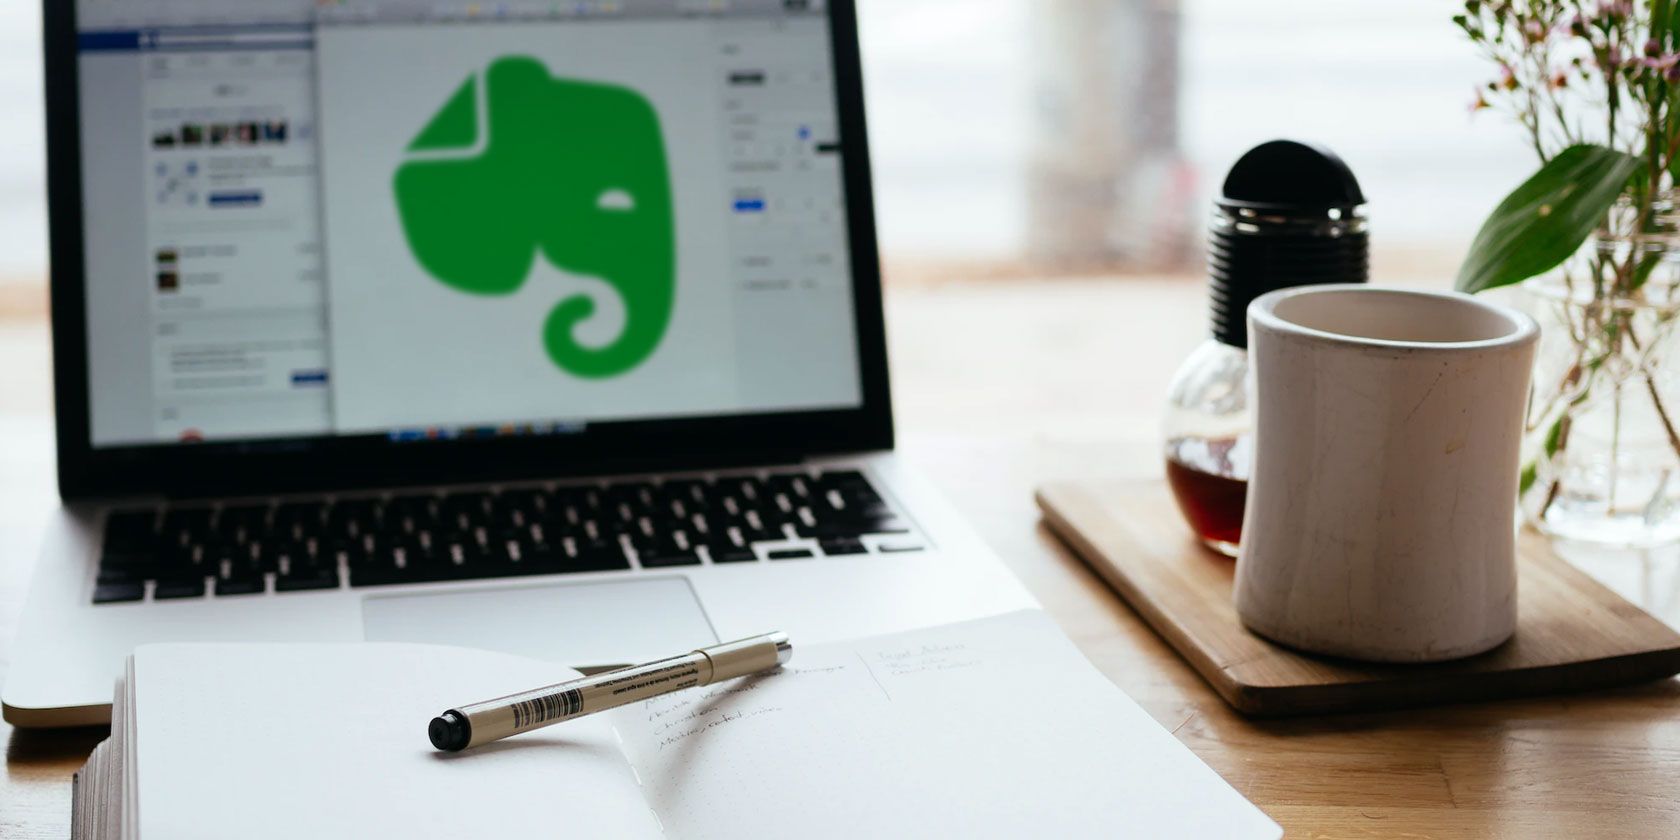 Evernote logo blurred on a laptop screen